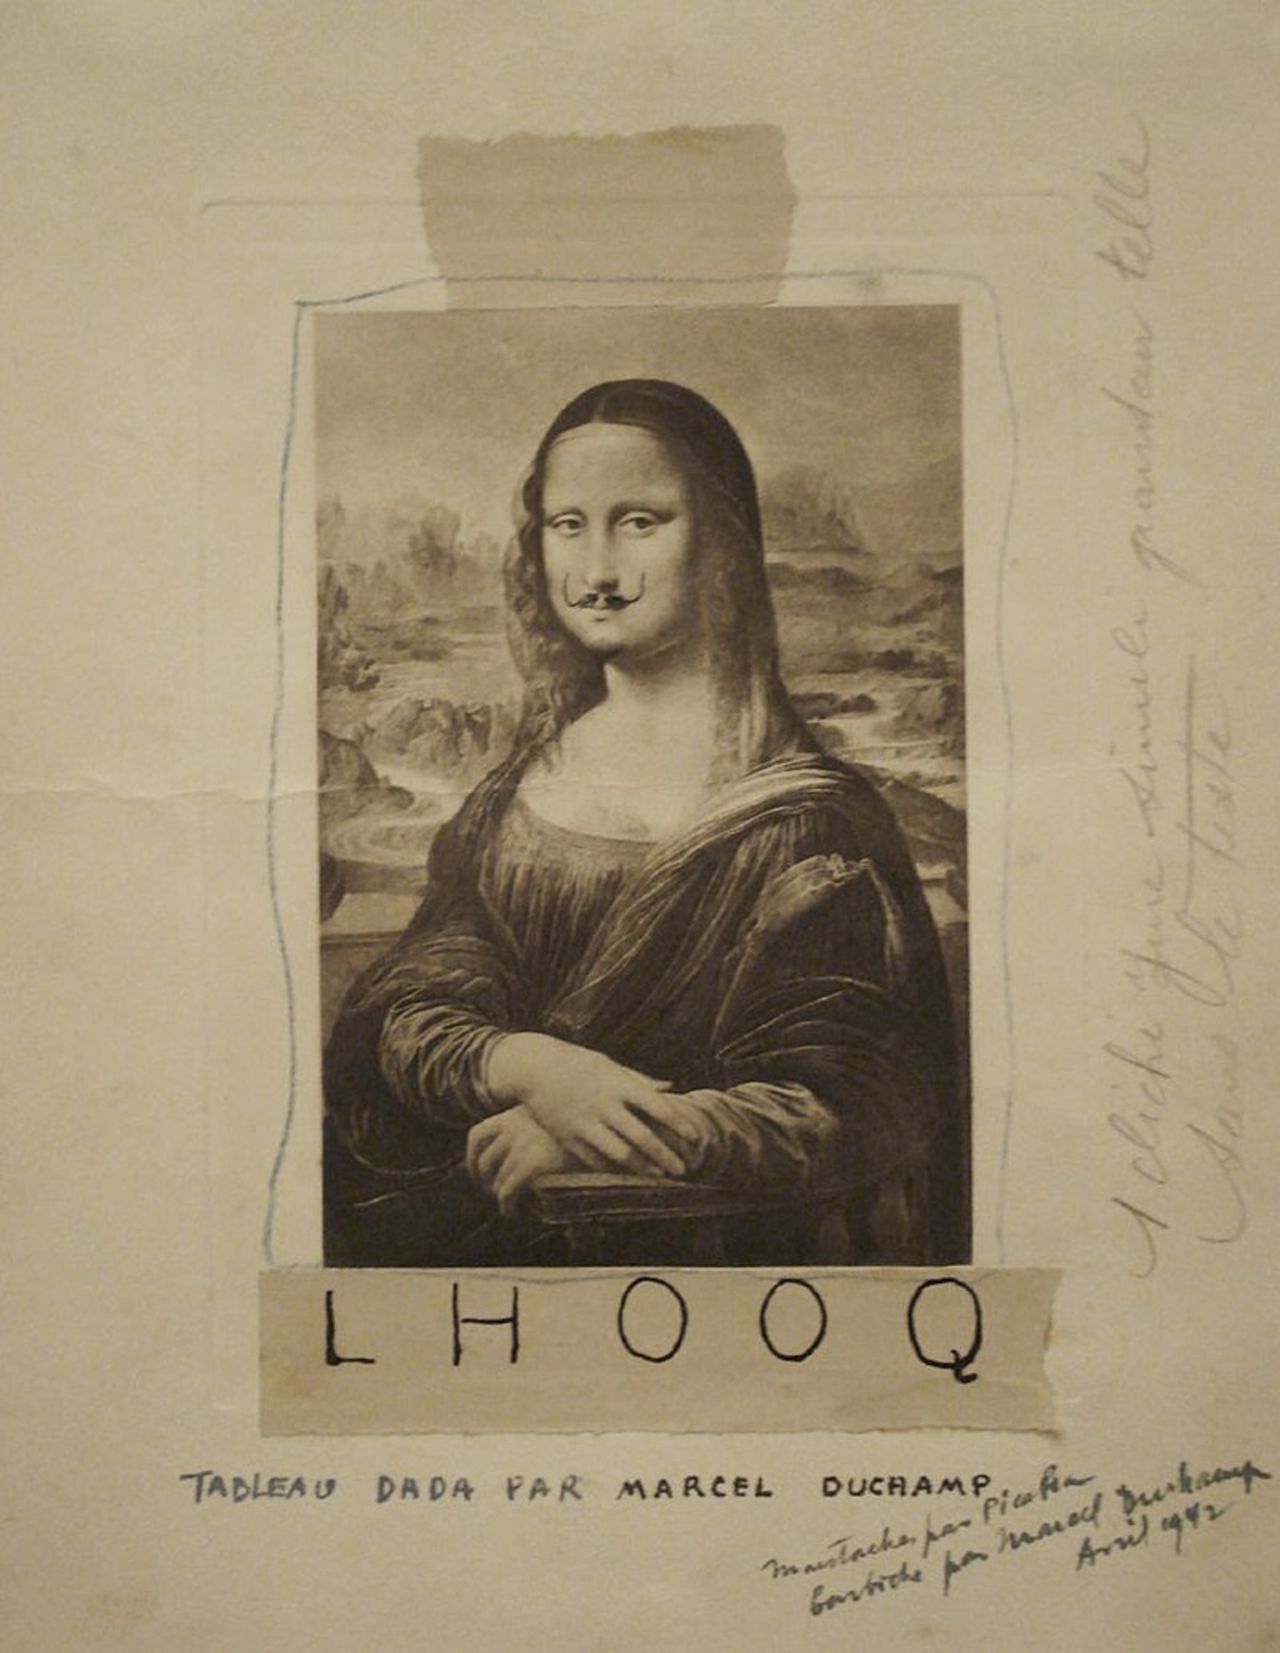 "L H O O Q" (1919) by Marcel Duchamp with Francis Pucabia, published in the magazine 391, No. 12, March 1920.